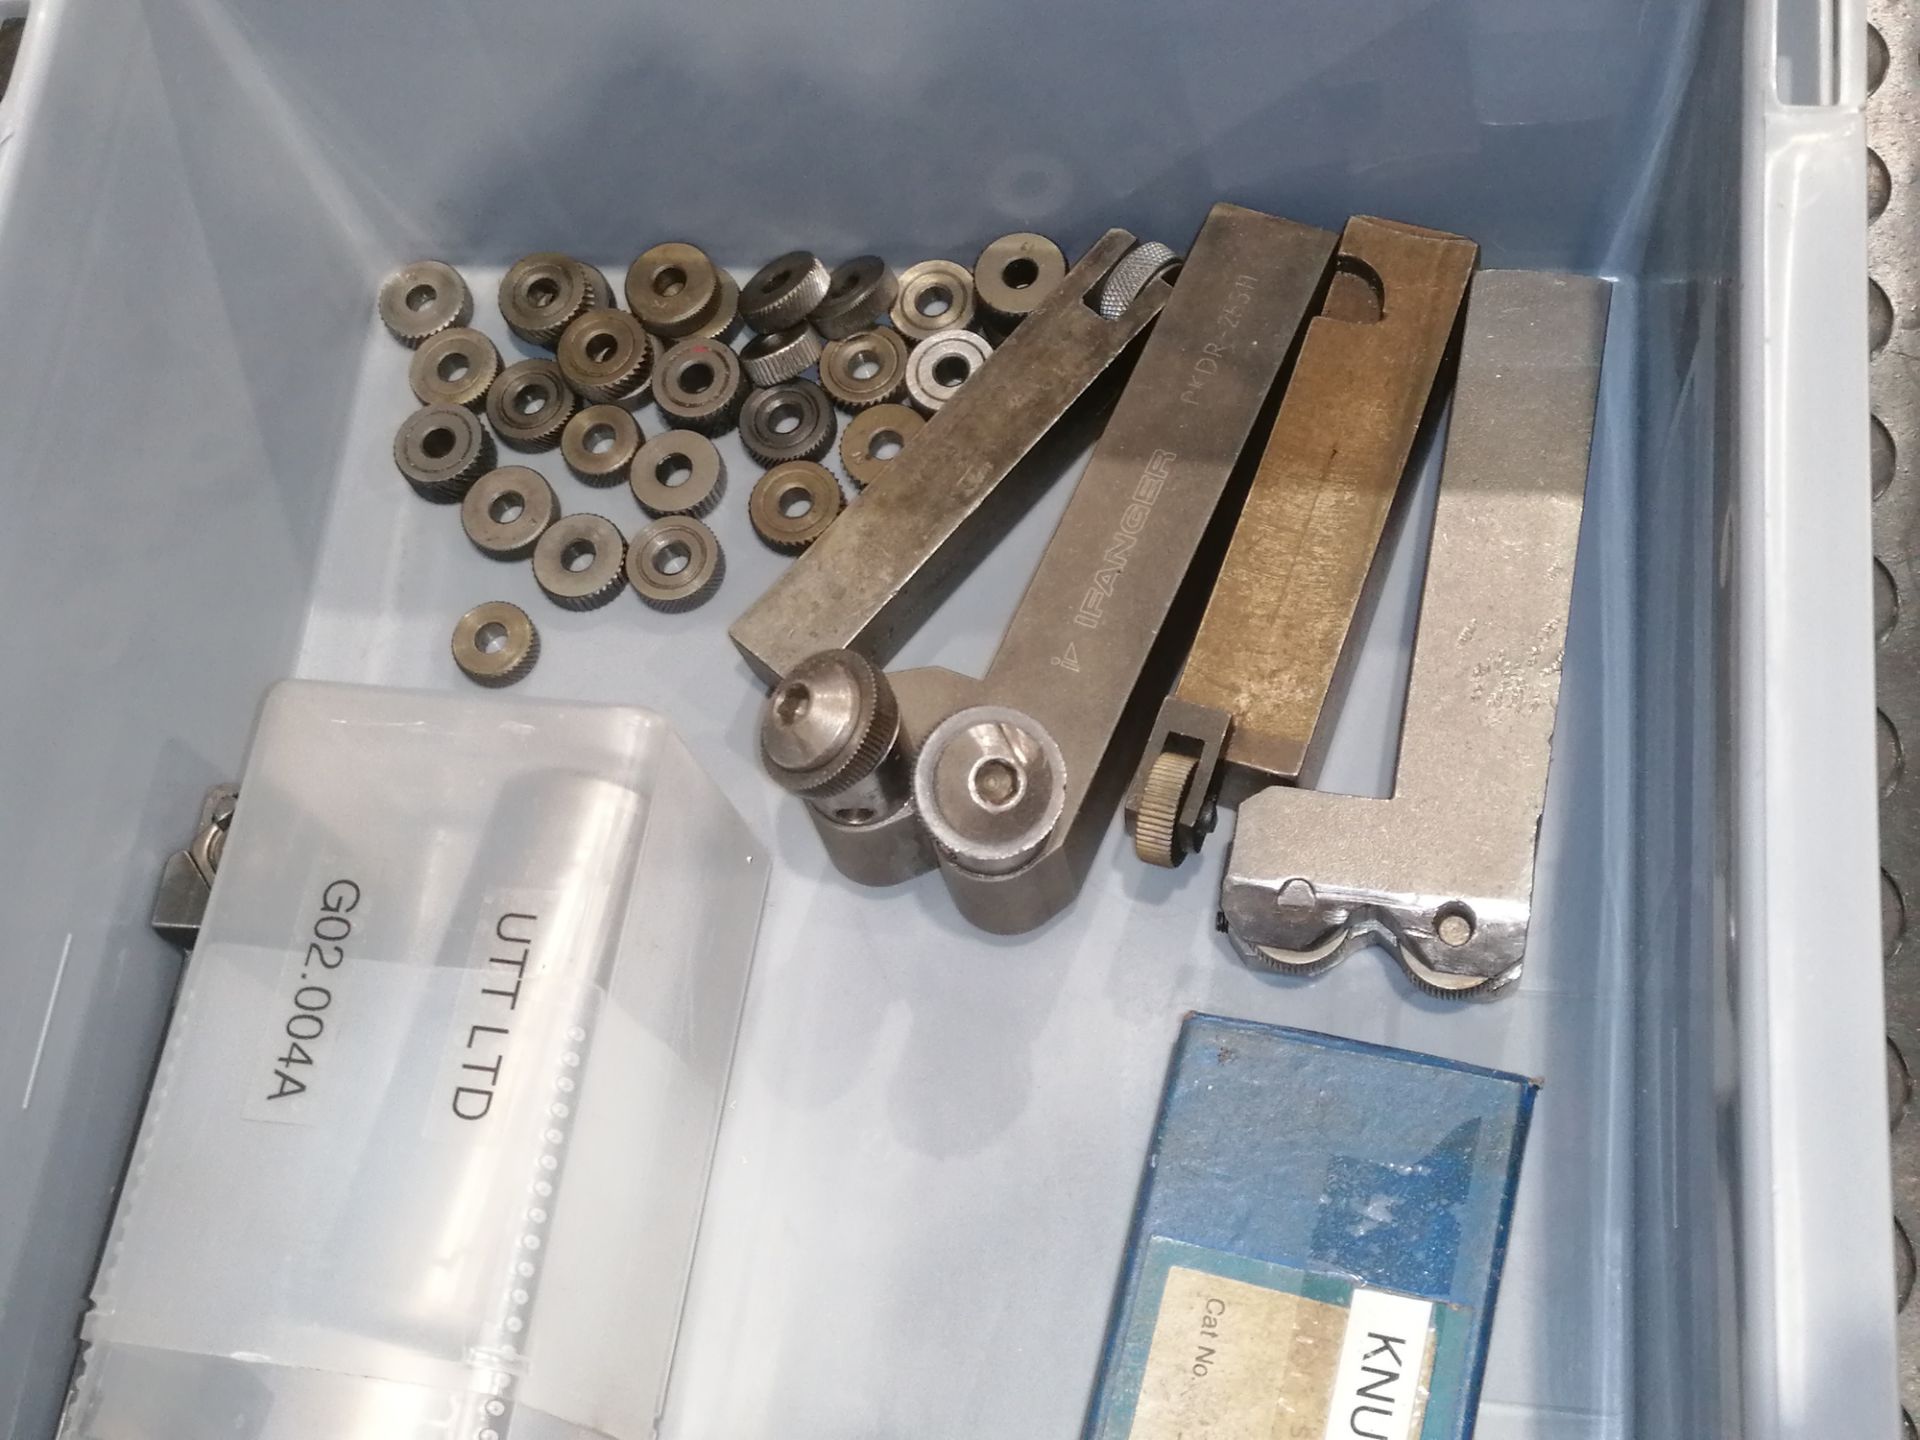 Knurling Tools (Various Sizes) (Please Note: Plastic Container Boxes Are Not Included) - Image 5 of 6